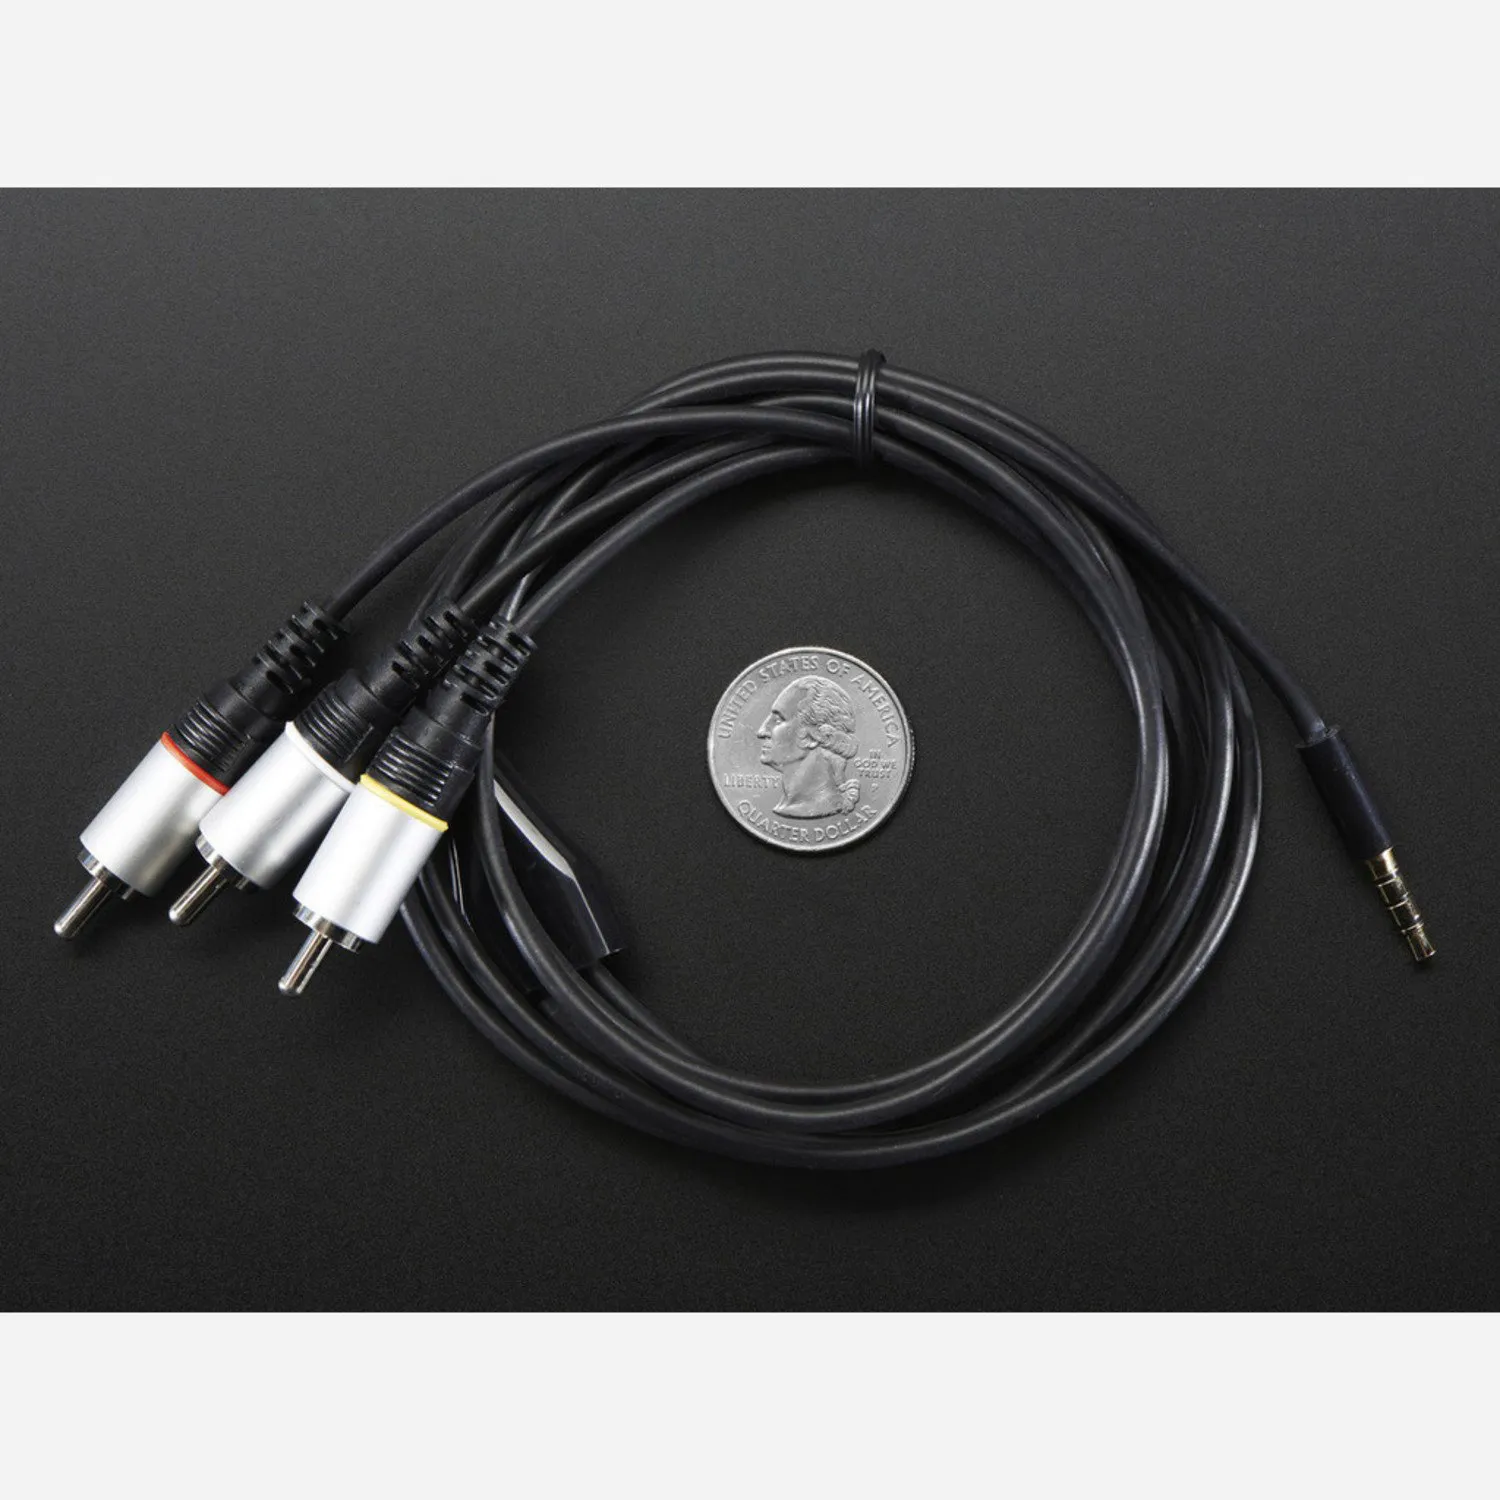 Photo of A/V and RCA (Composite Video, Audio) Cable for Raspberry Pi